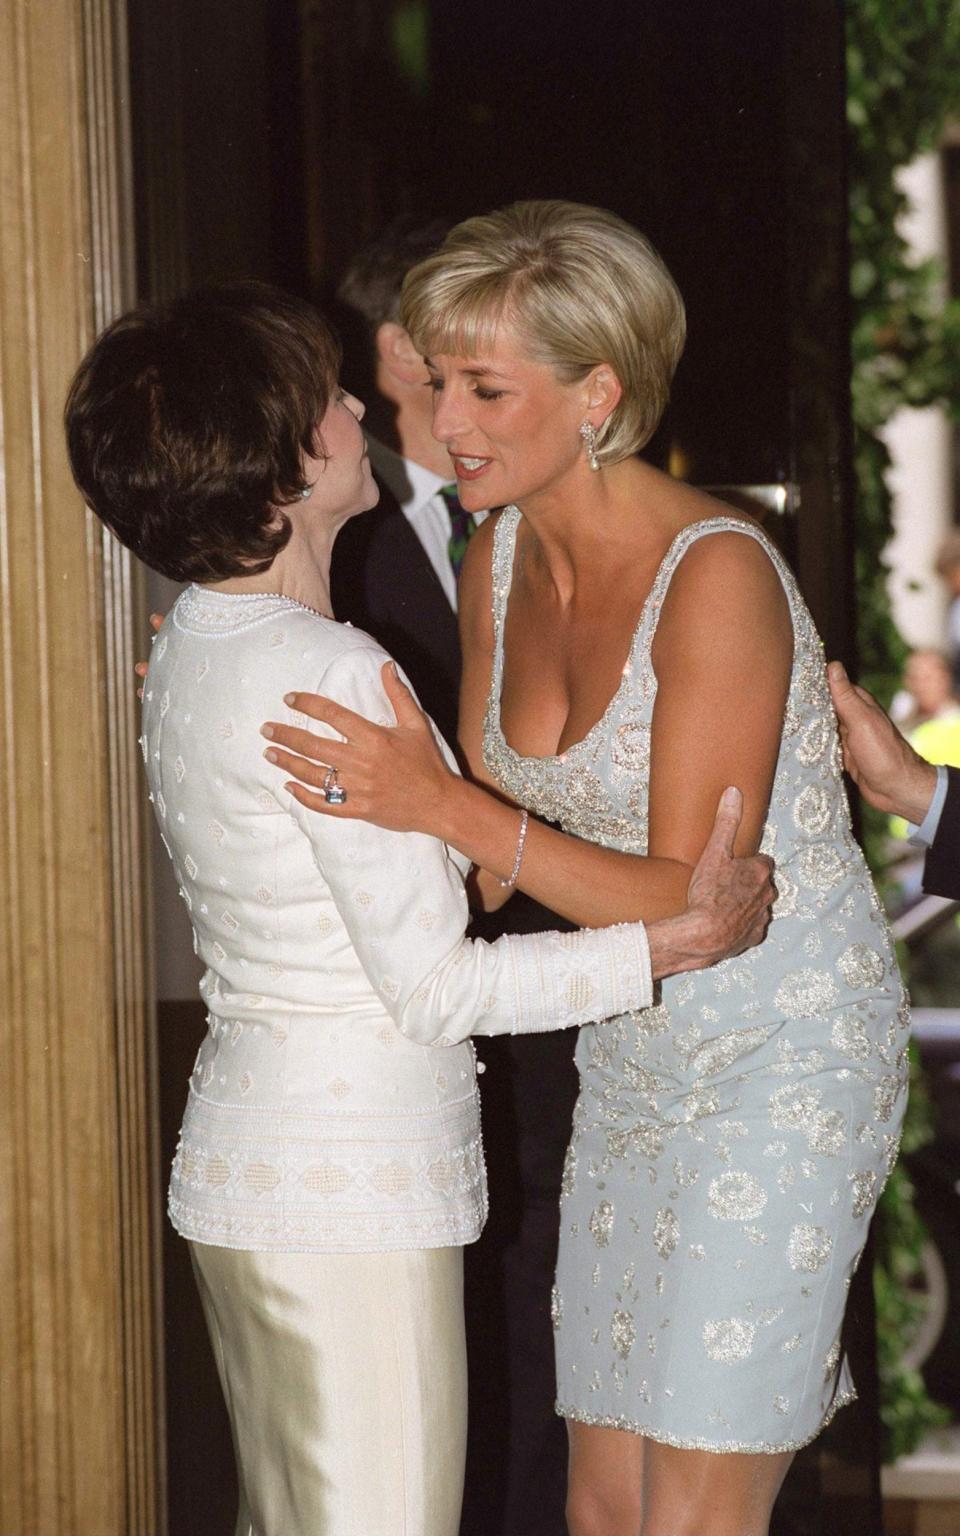 With Diana, Princess of Wales - Tim Graham Photo Library via Getty Images